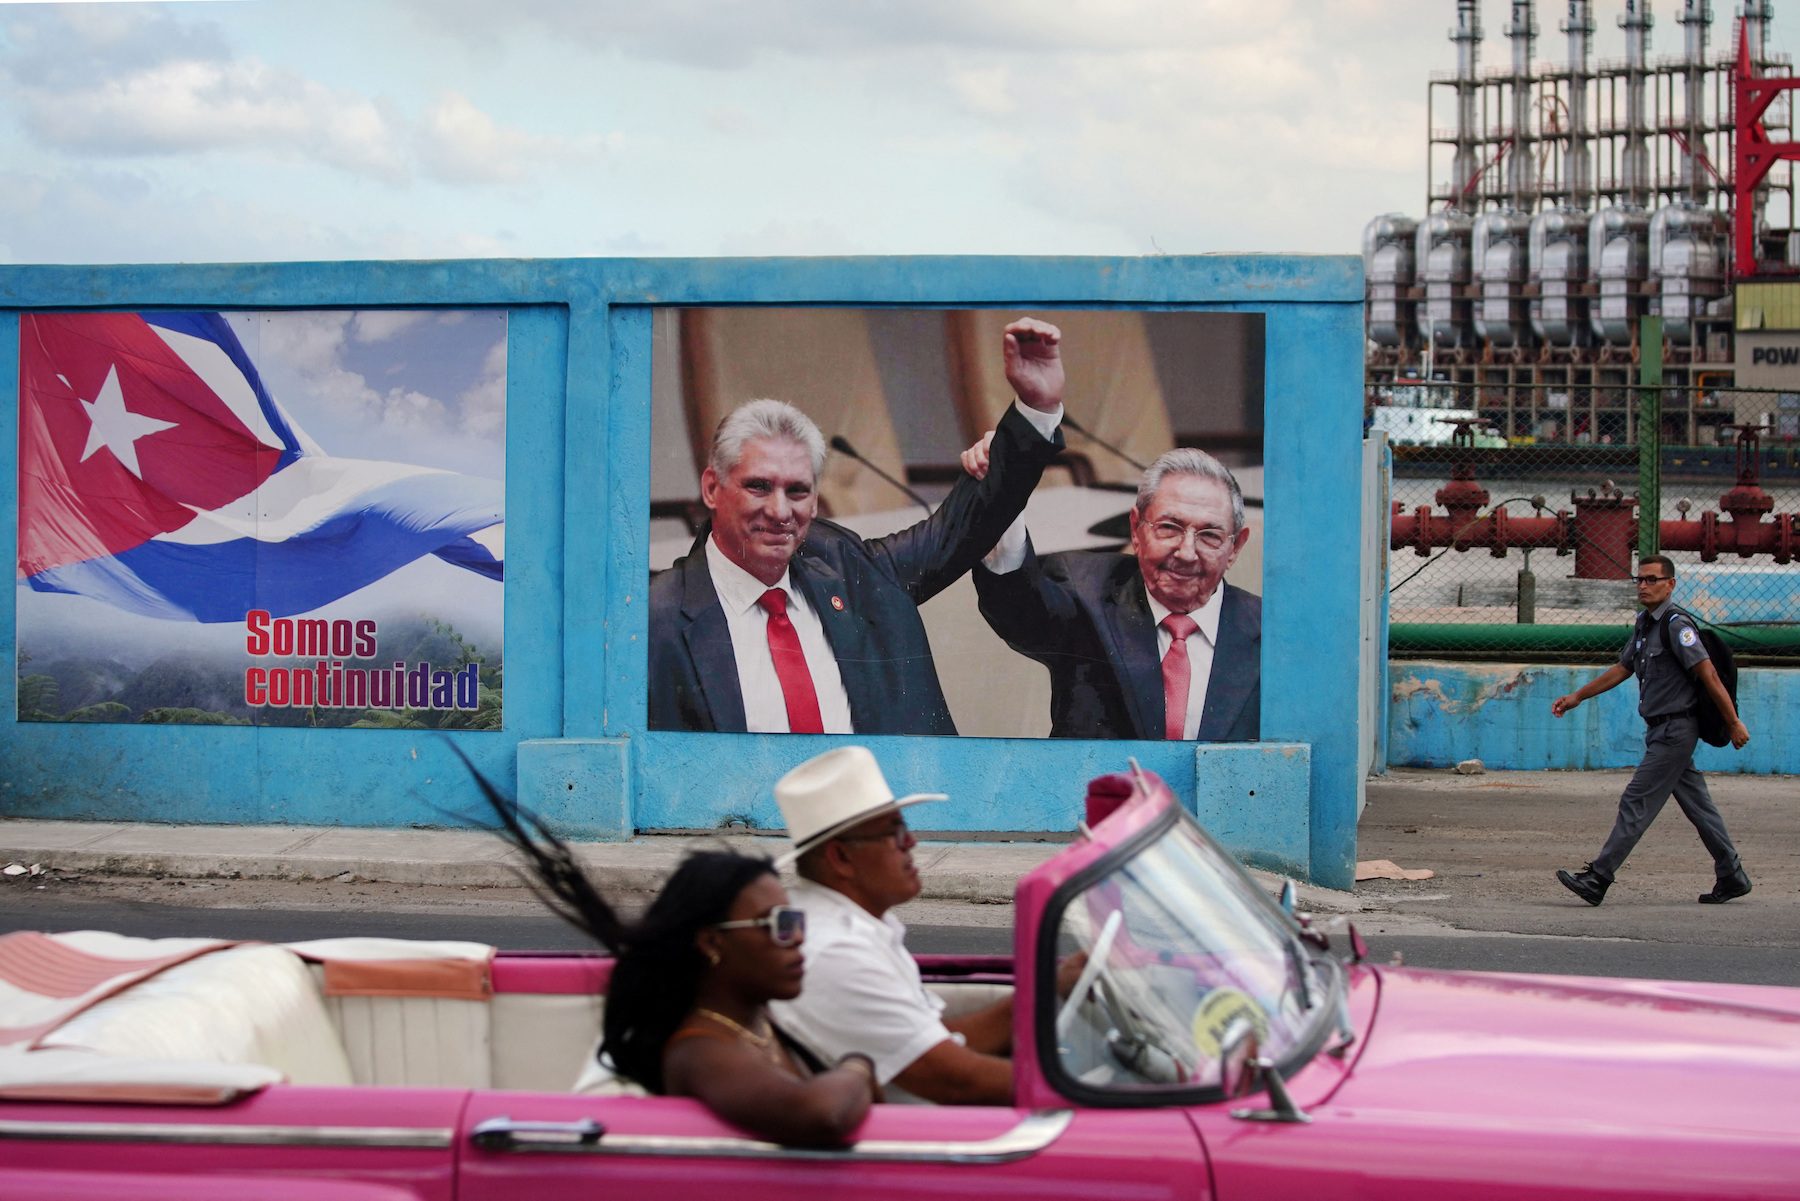 Cuban President Miguel Diaz-Canel reelected by lawmakers